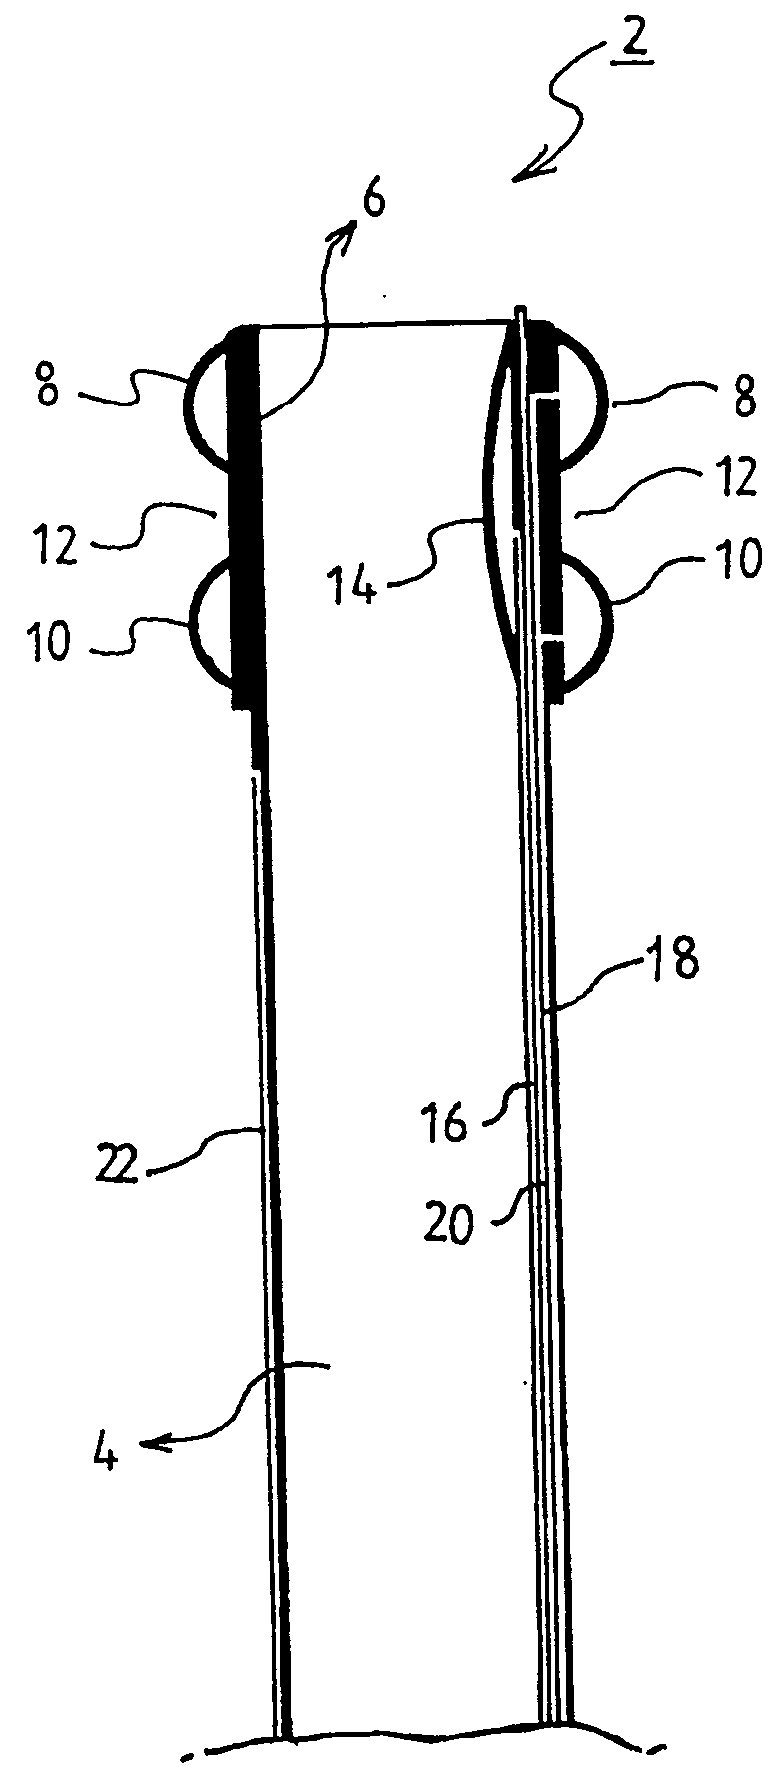 Indwelling fecal diverting device